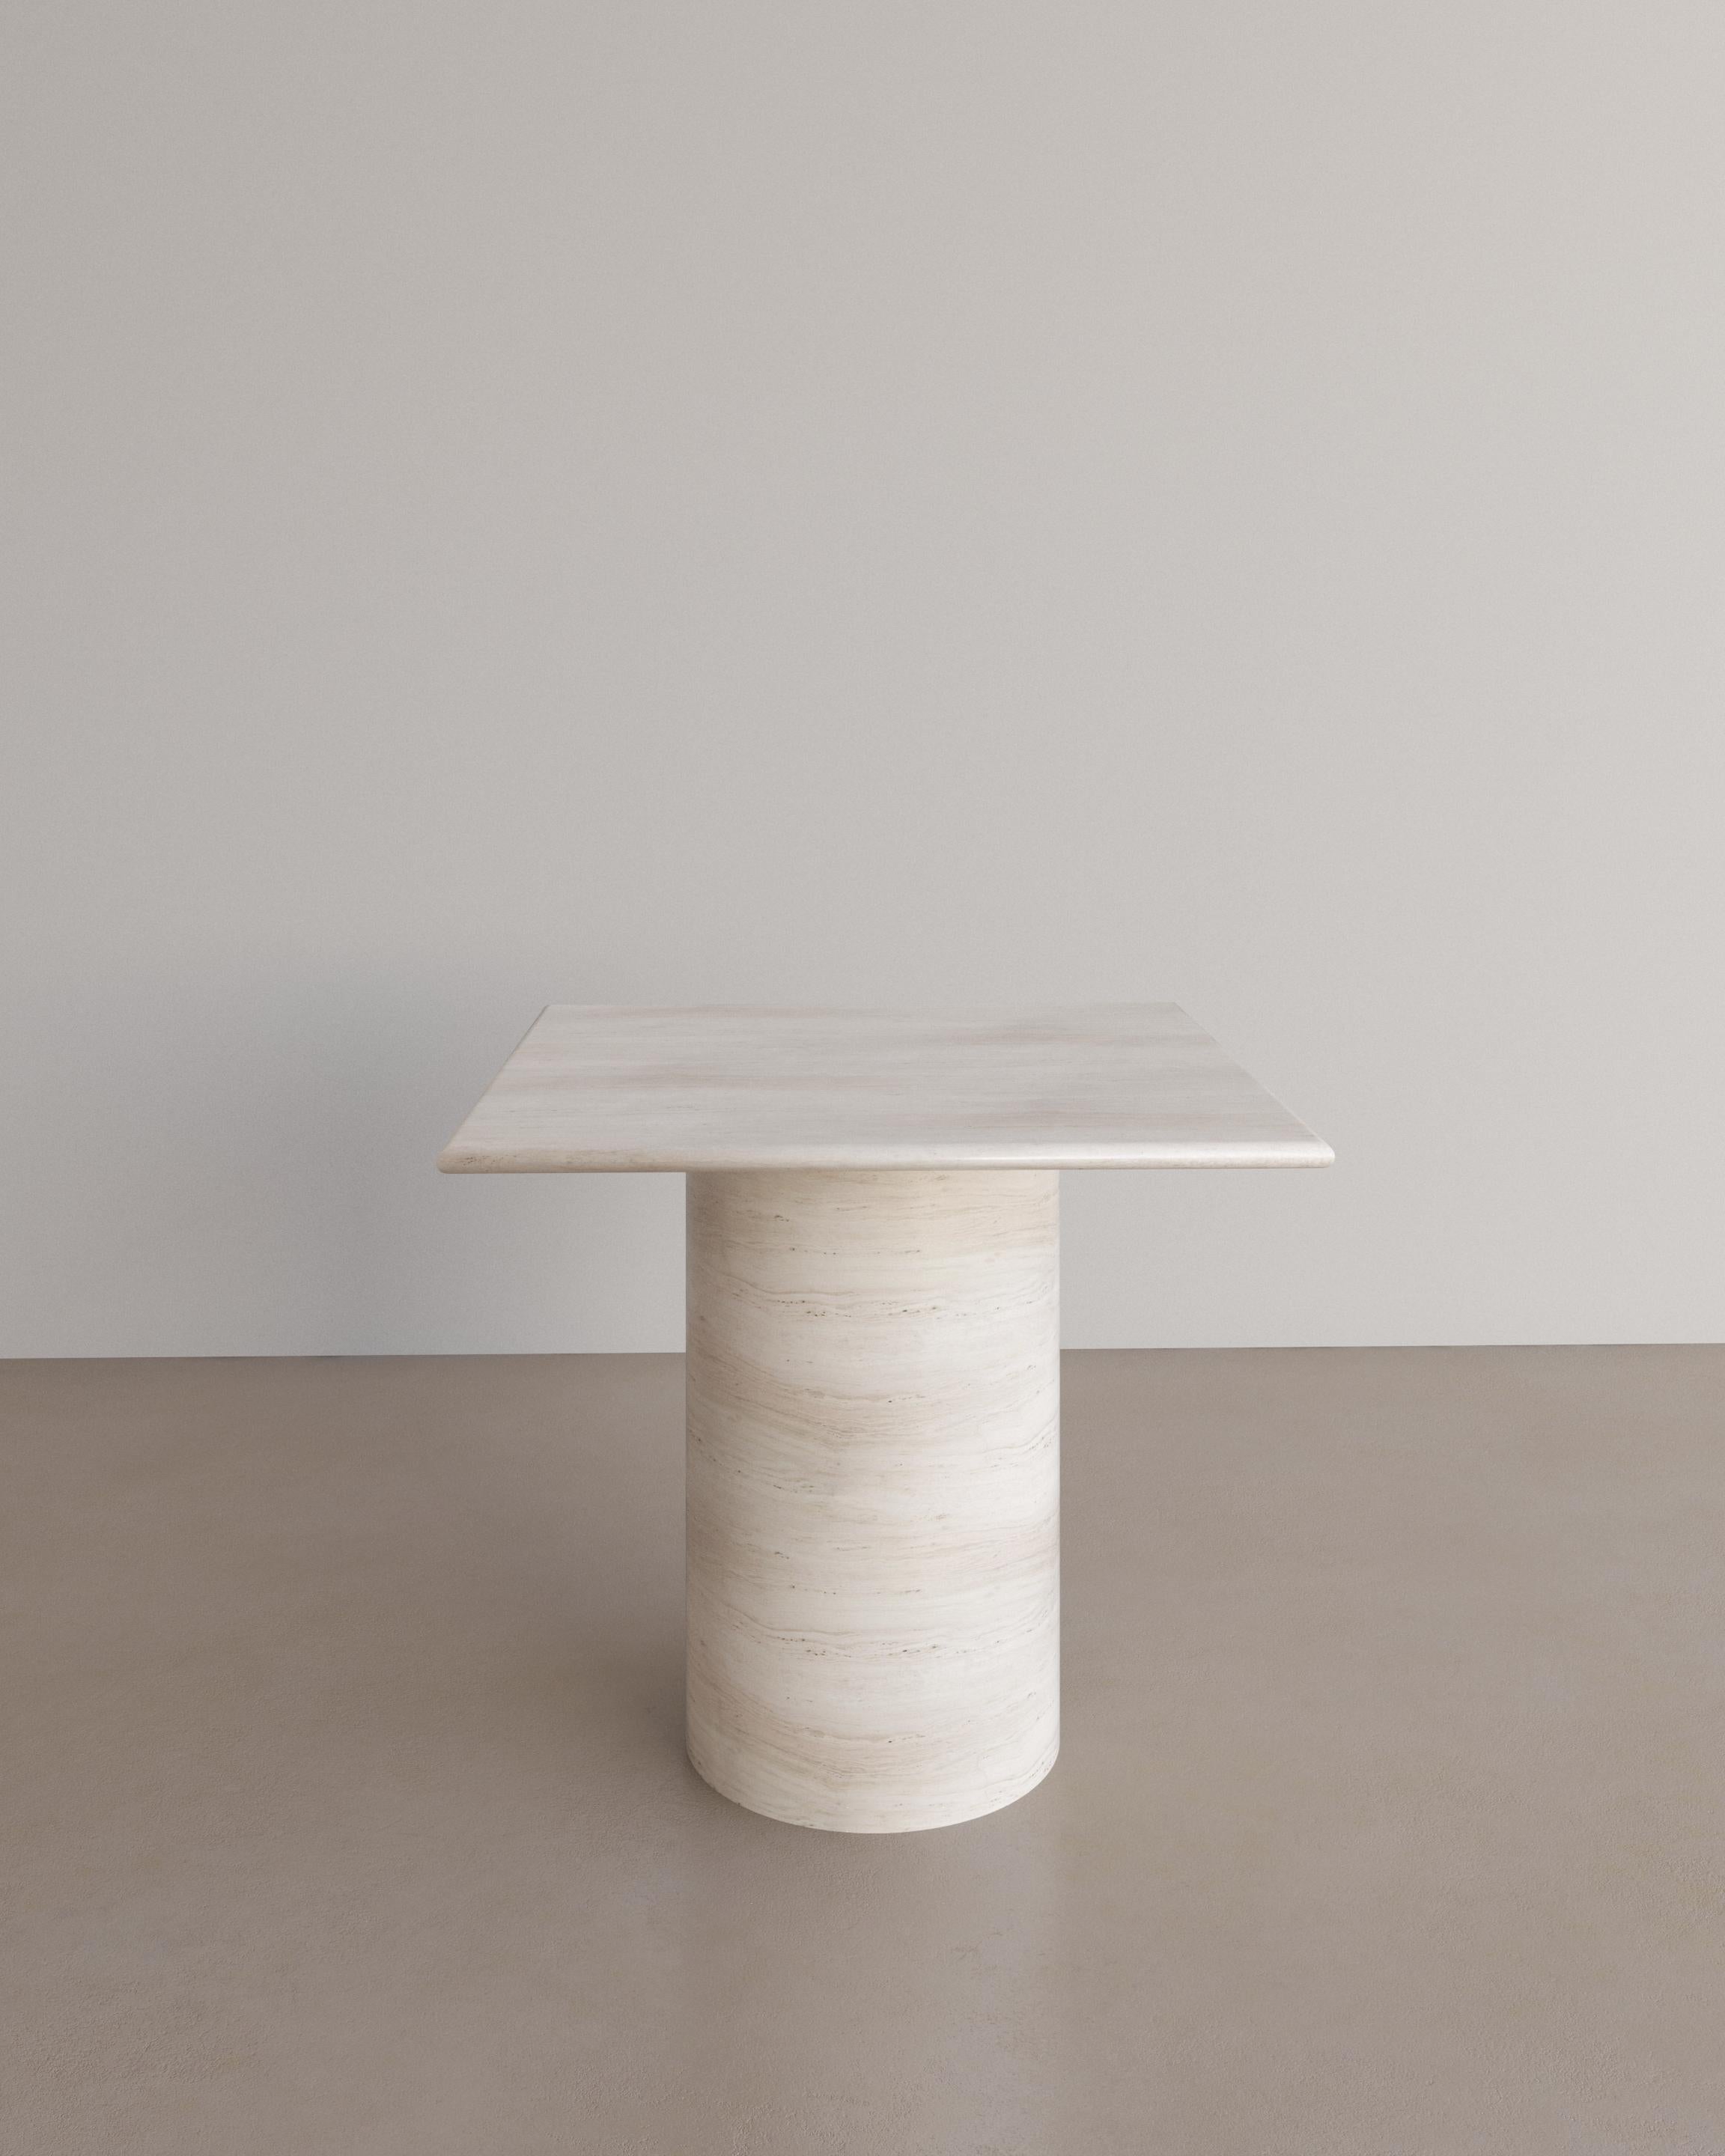 The Essentialist presents the Voyage Occasional Table II in Bianco Travertine. 
The Voyage Occasional Table I celebrates the simple pleasures that define life and replenish the soul through harnessing essential form. Envisioned as an ode to